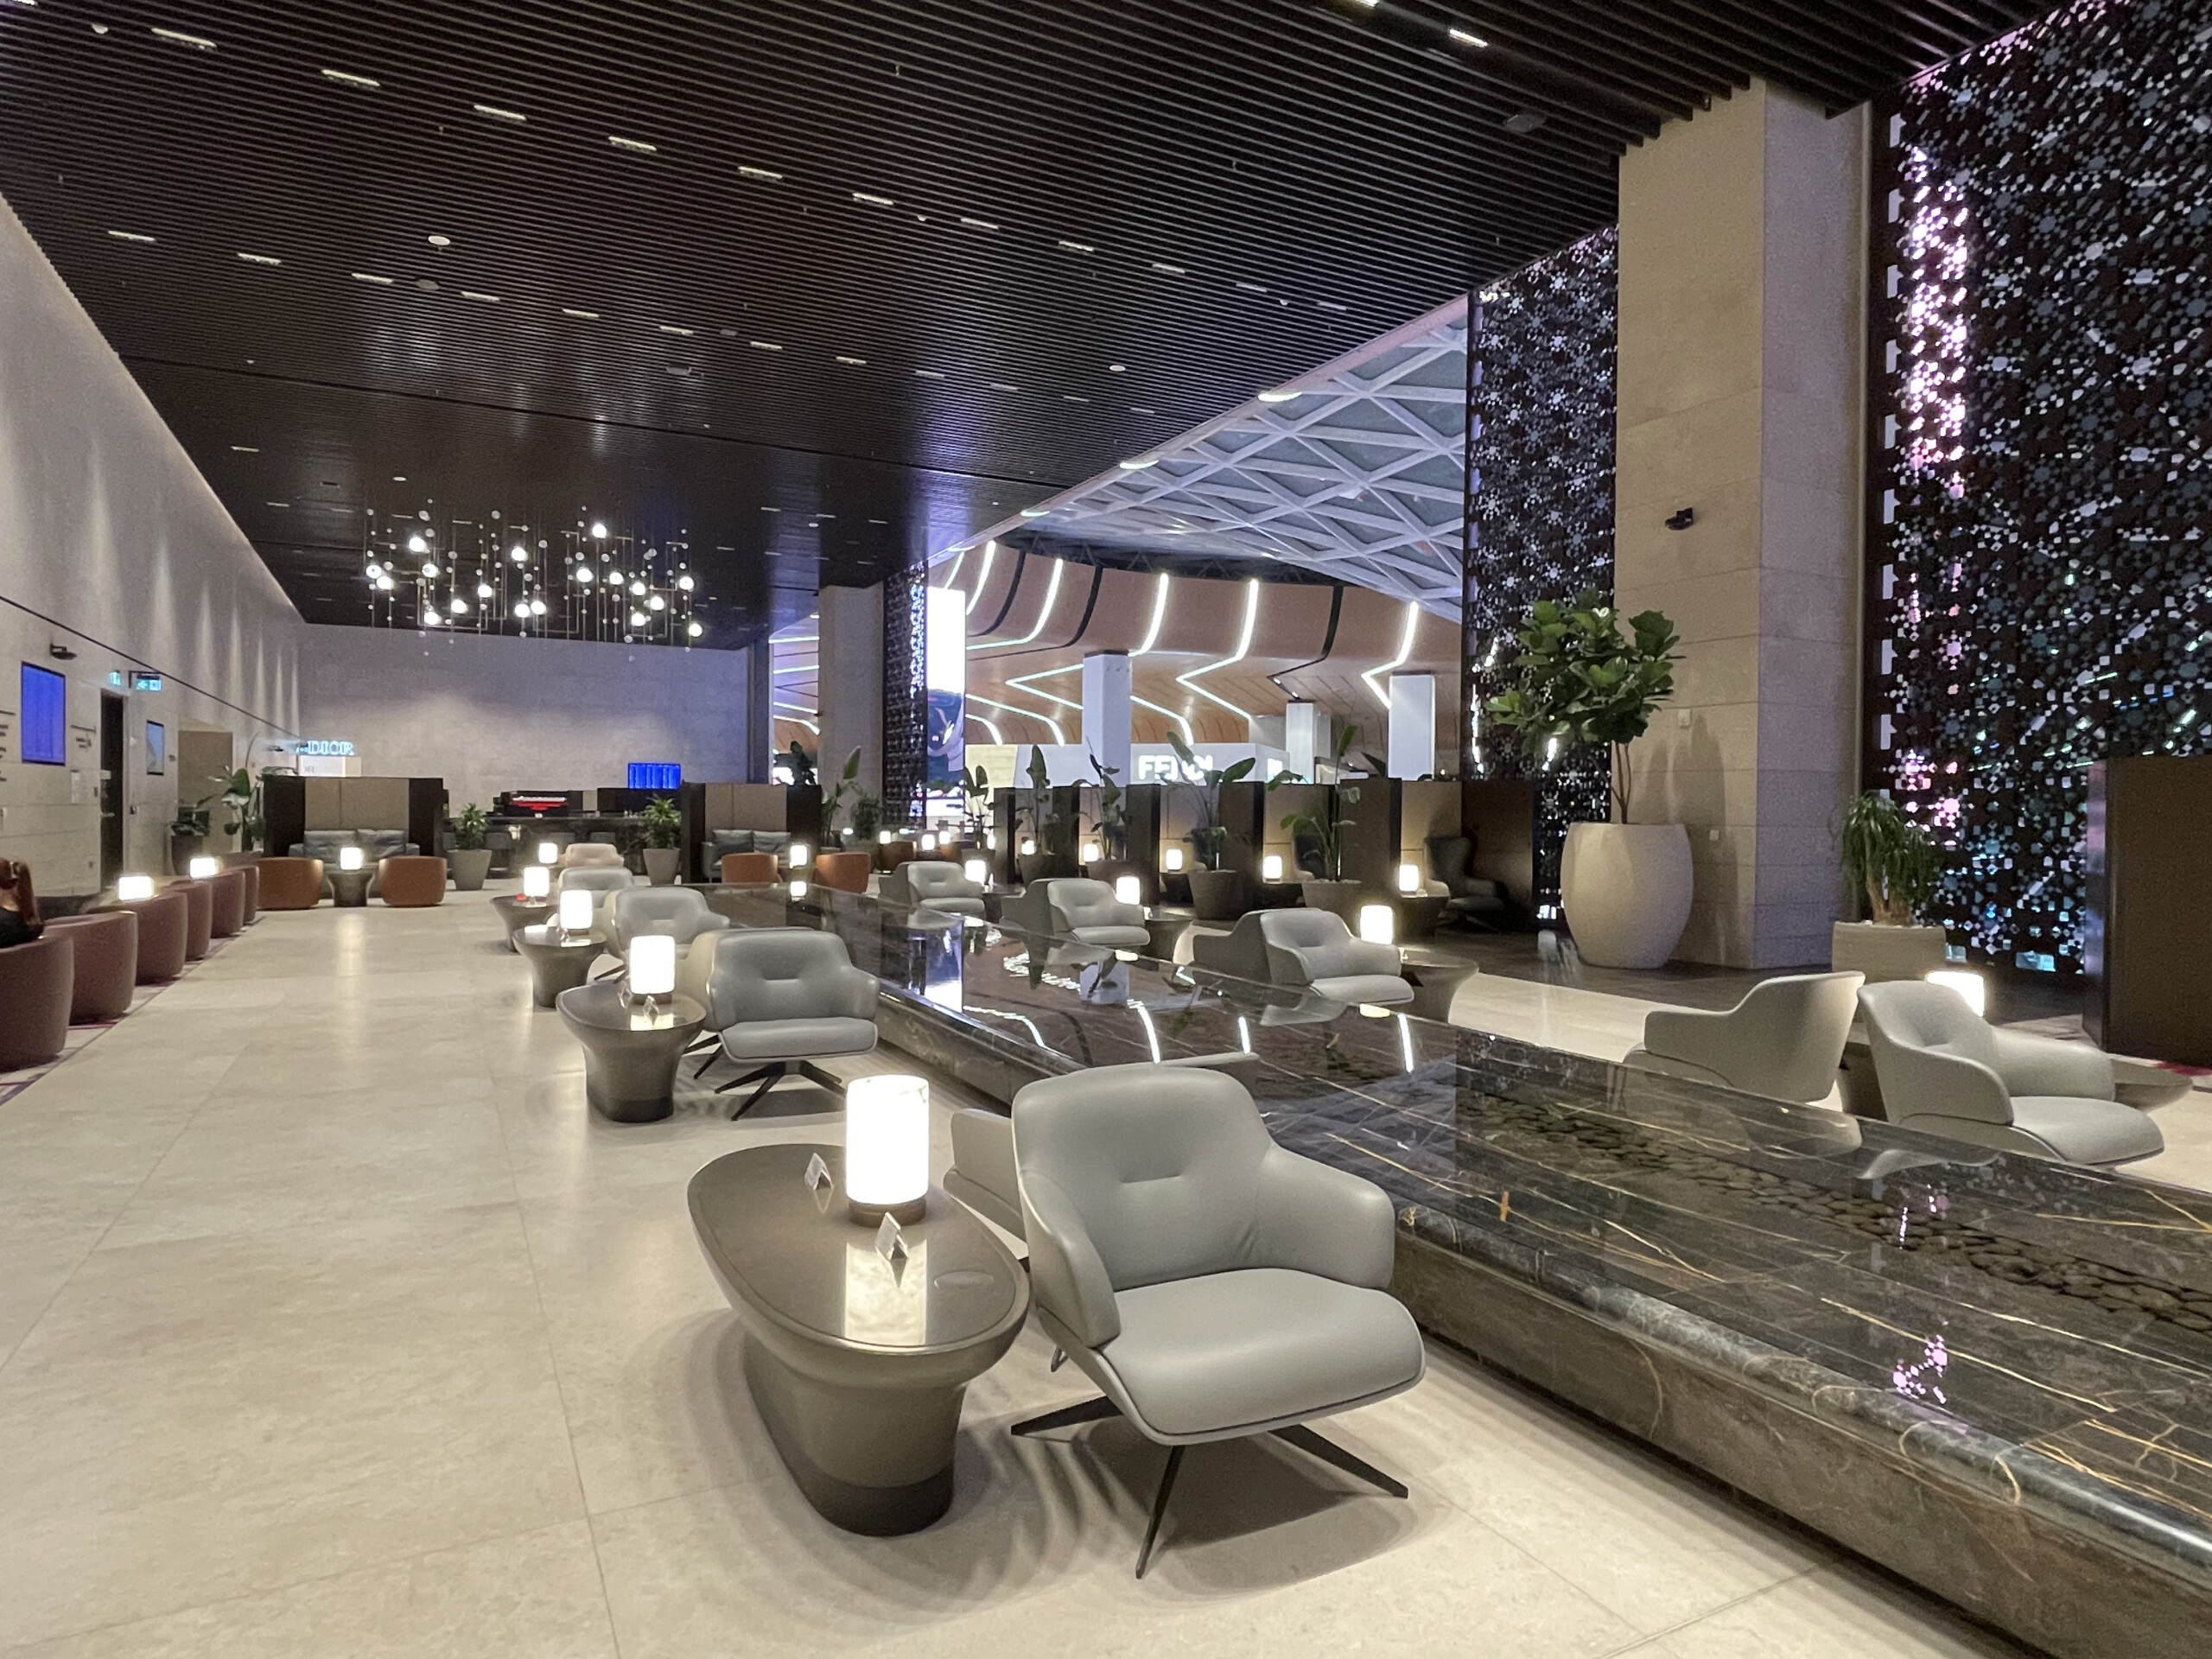 Louis Vuitton's First Ever Airport Lounge In Qatar's Hamad